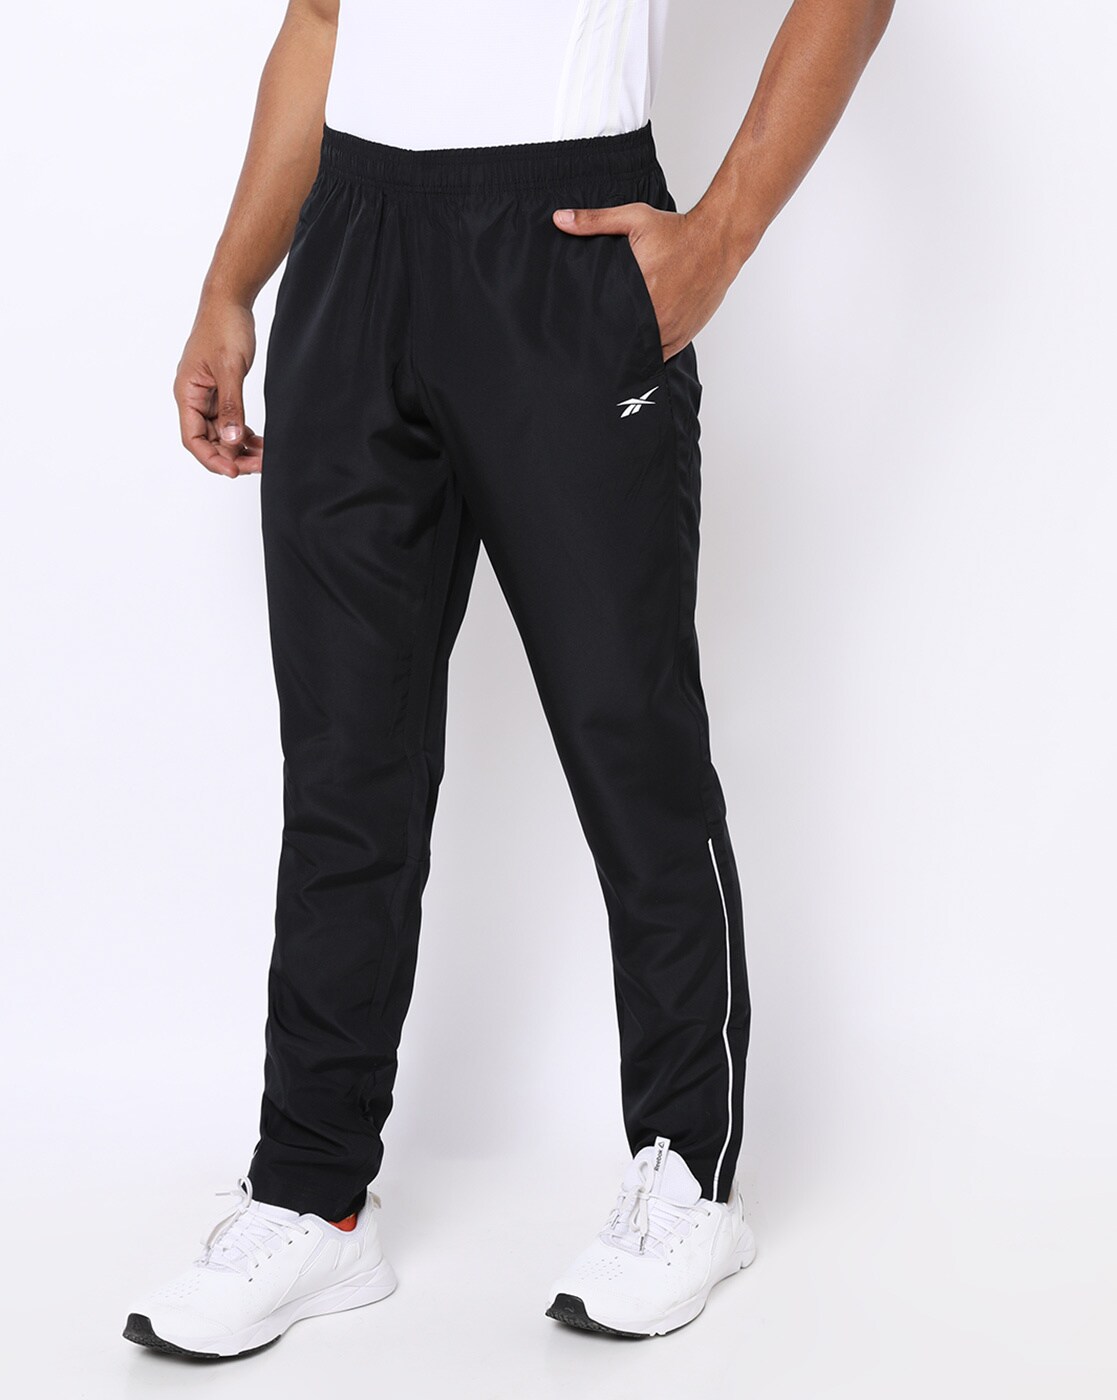 Men Sport Pants Running Pants With Zipper Pockets Training And Jogging Men  Pants Gym Fitness Pants For Men Sportwear  Running Pants  AliExpress